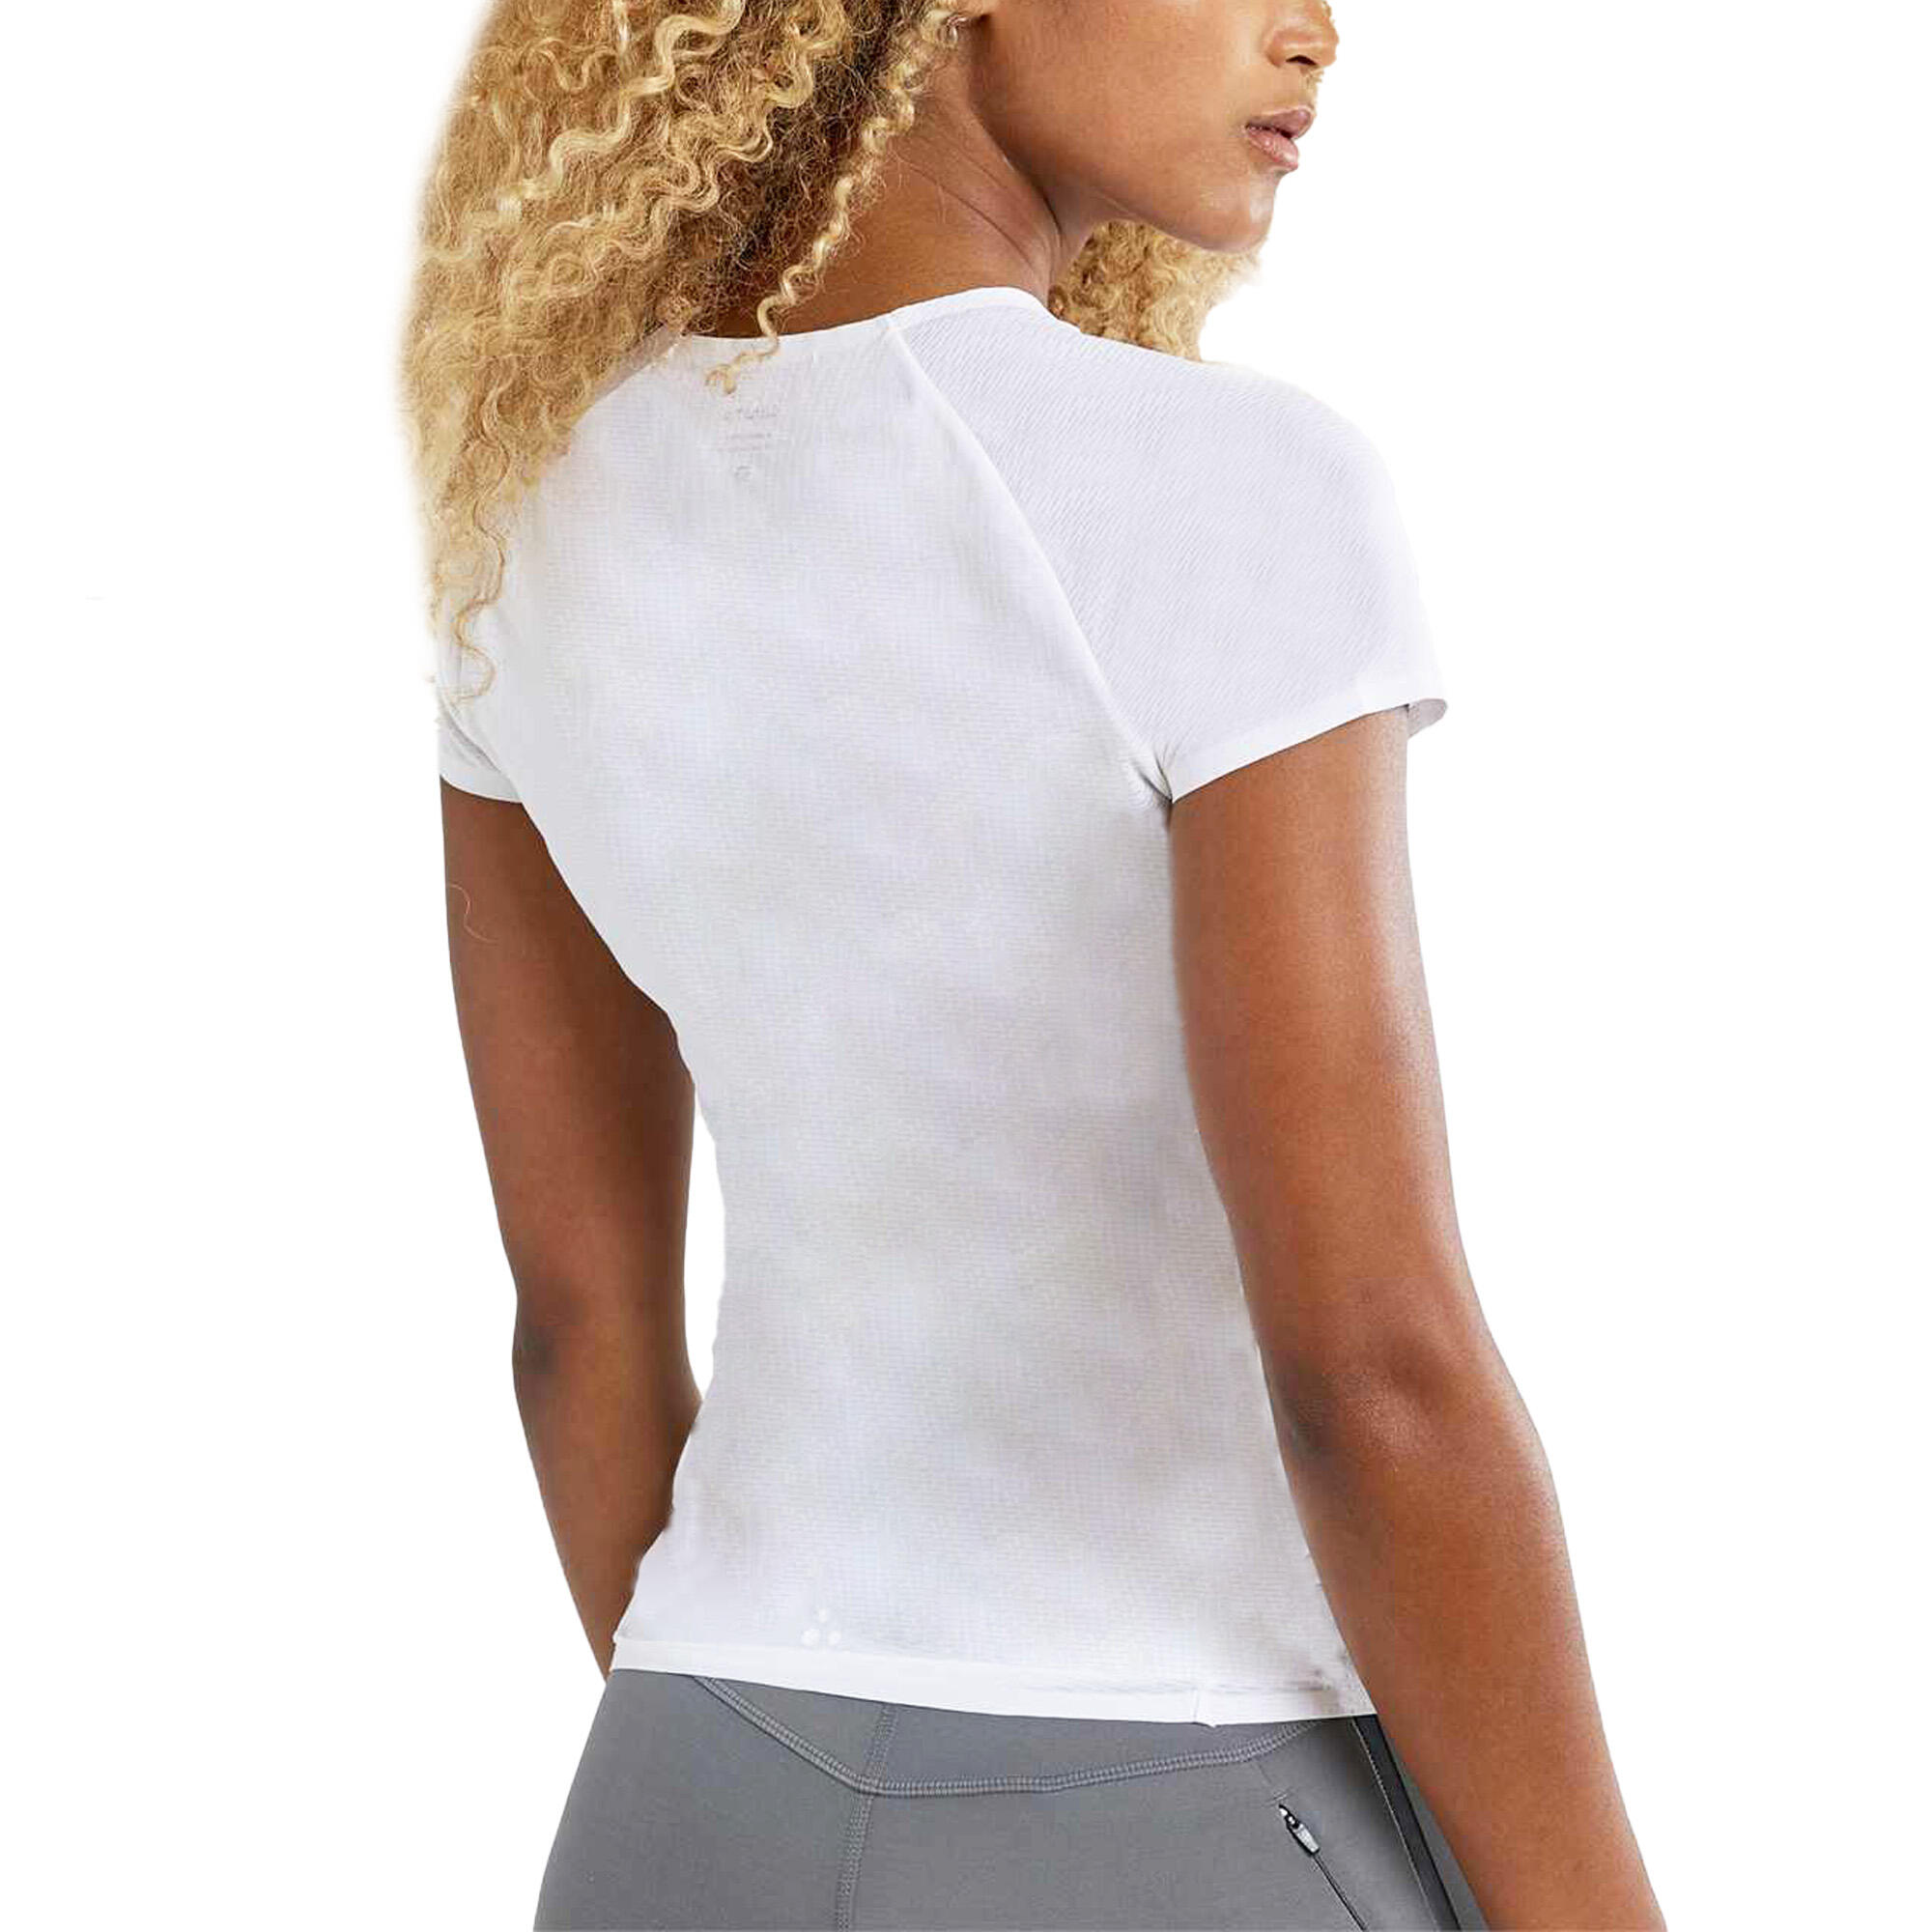 Womens/Ladies Pro Quick Dry Base Layer Top (White) 2/4